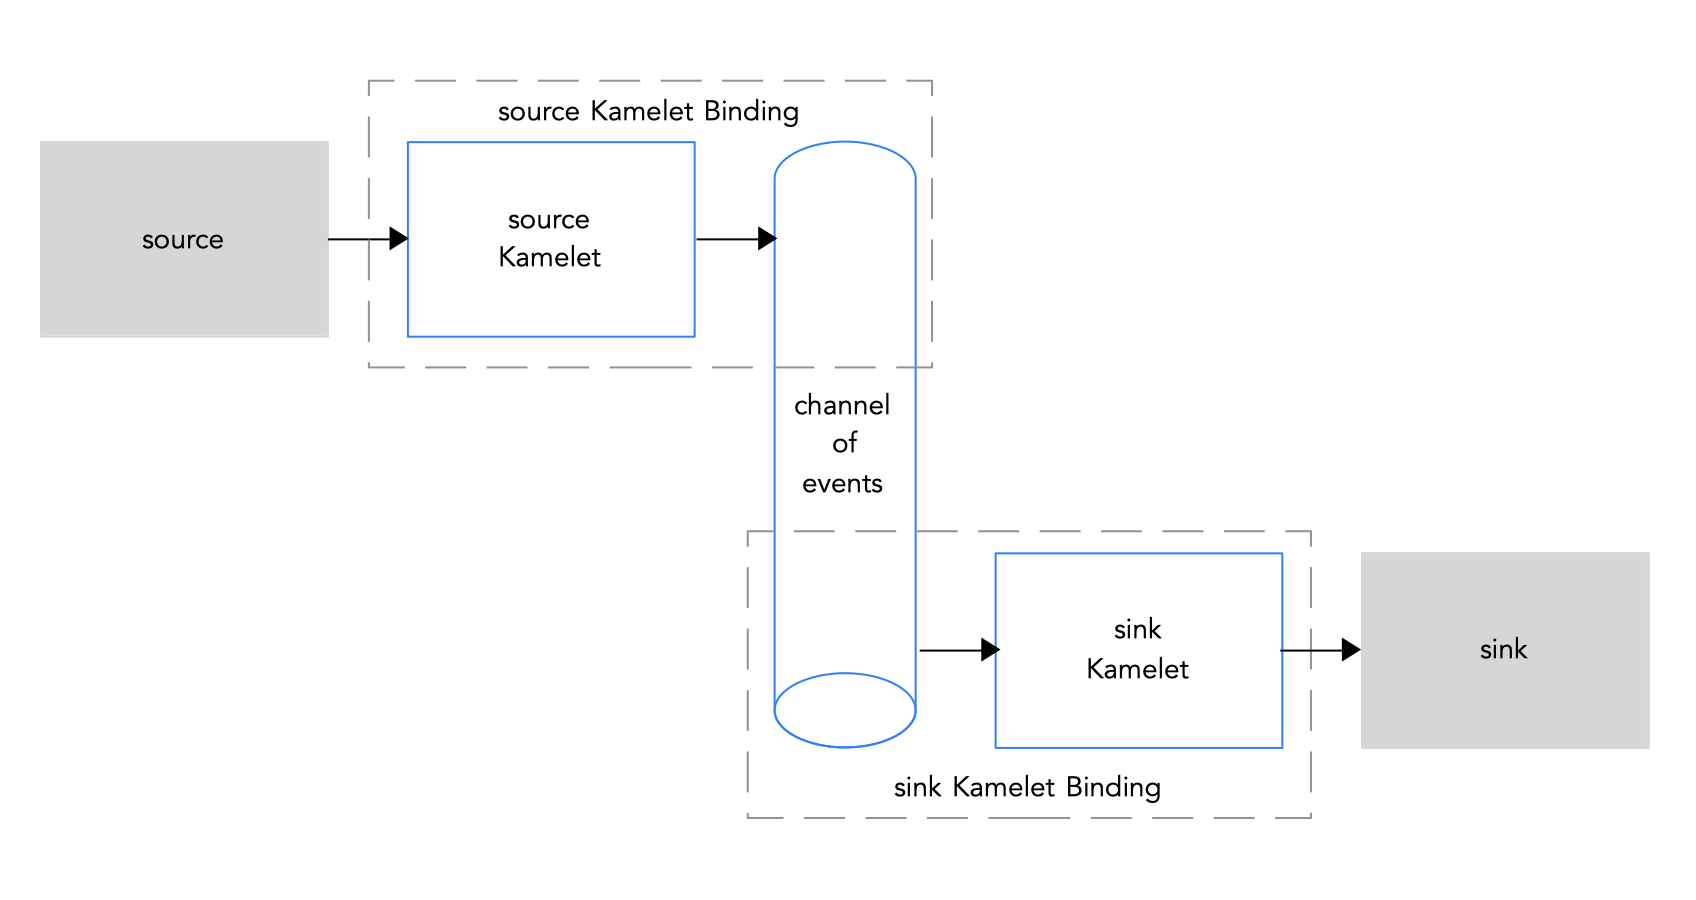 Connecting source and sink Kamelets to a channel of events